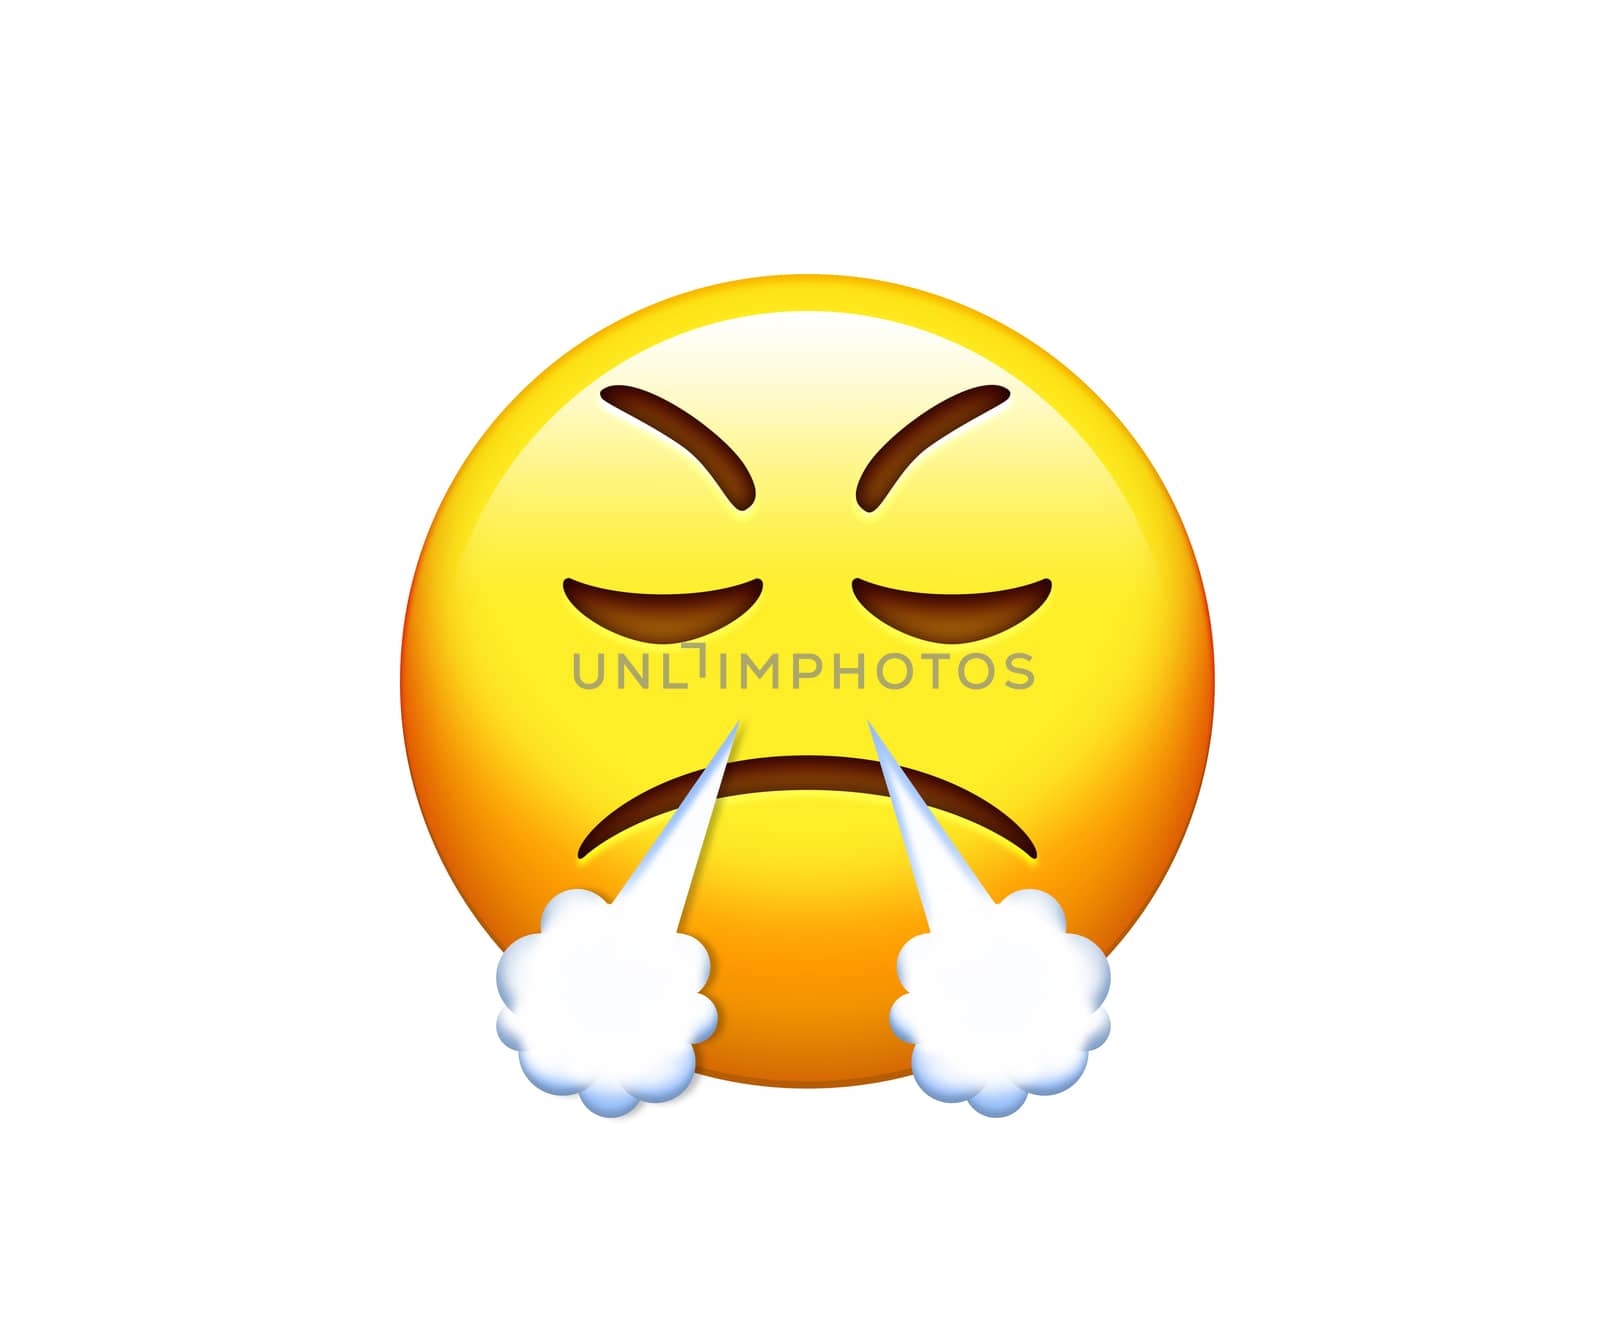 The emoji sad, angry and feeling depressed yellow face icon